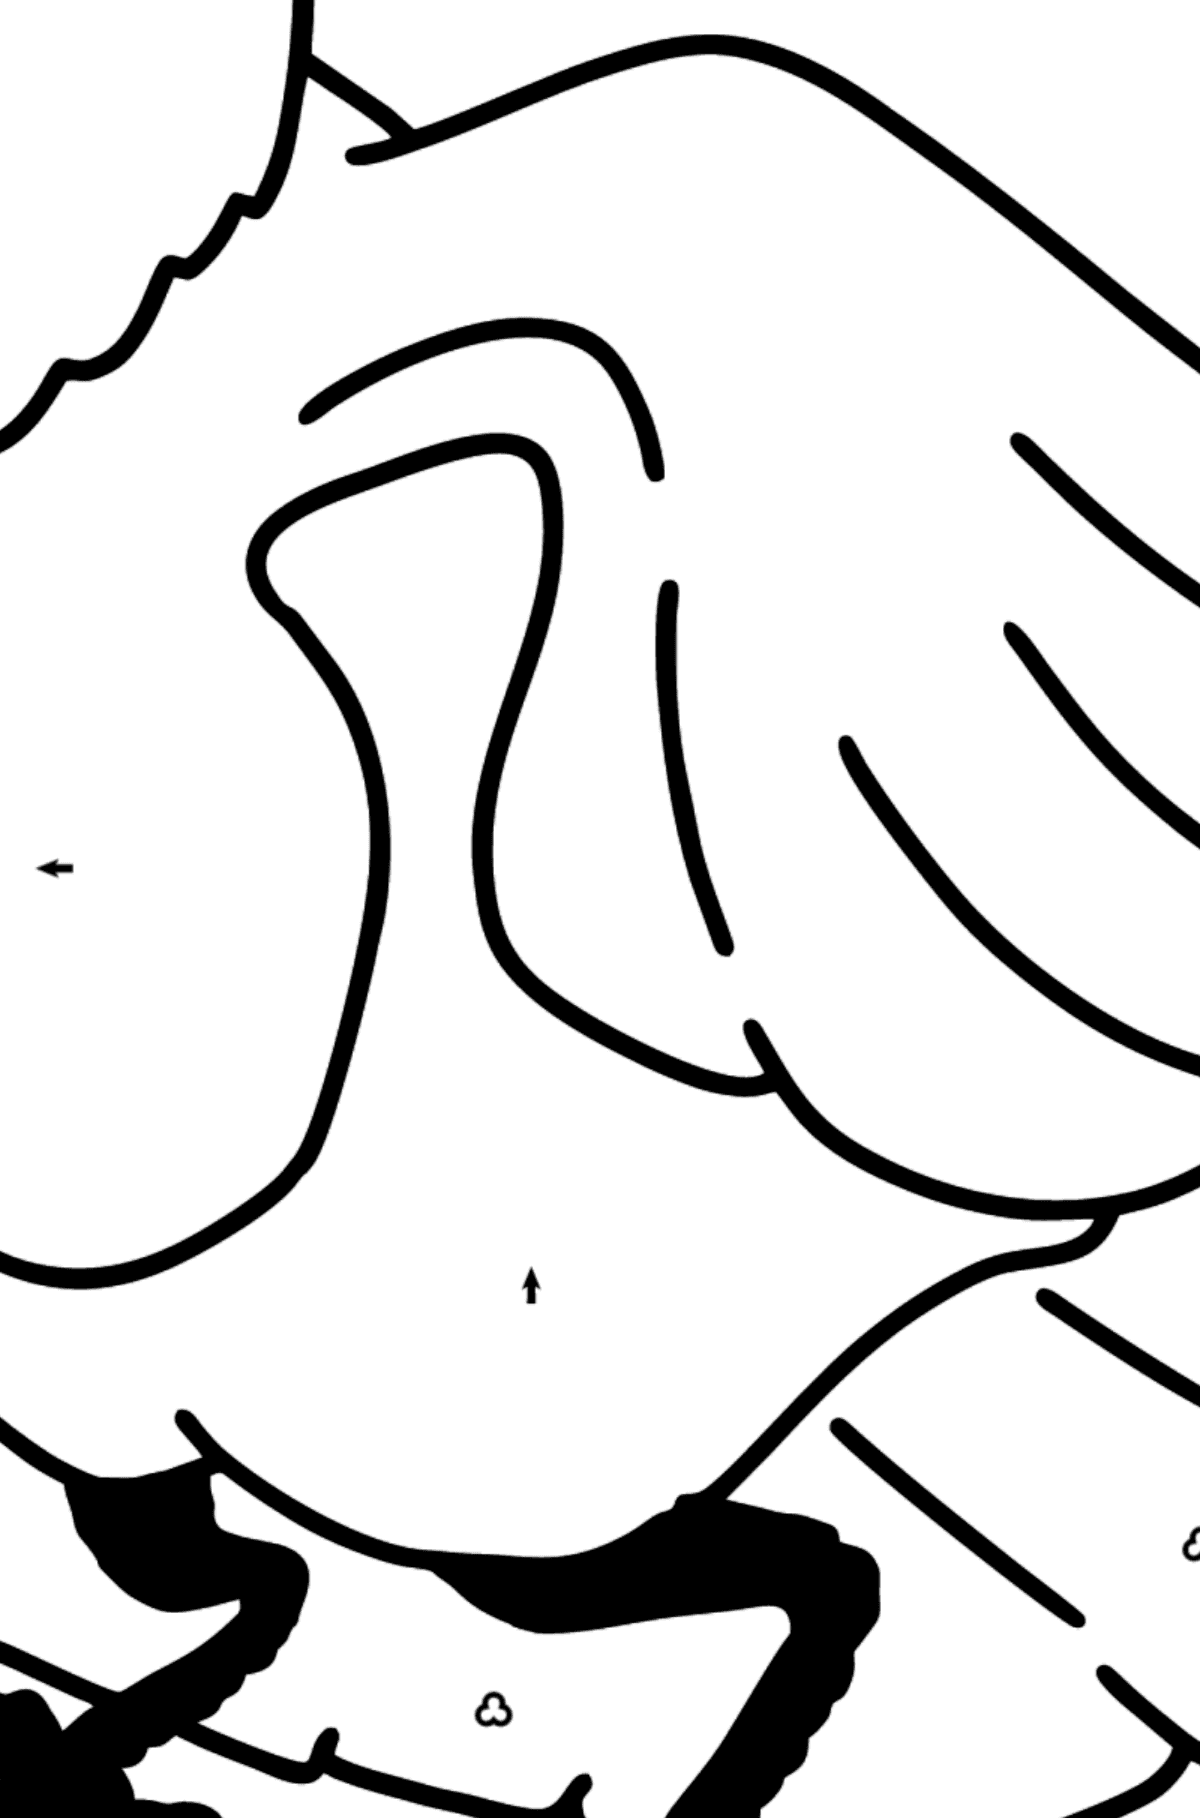 Dove coloring page - Coloring by Symbols and Geometric Shapes for Kids